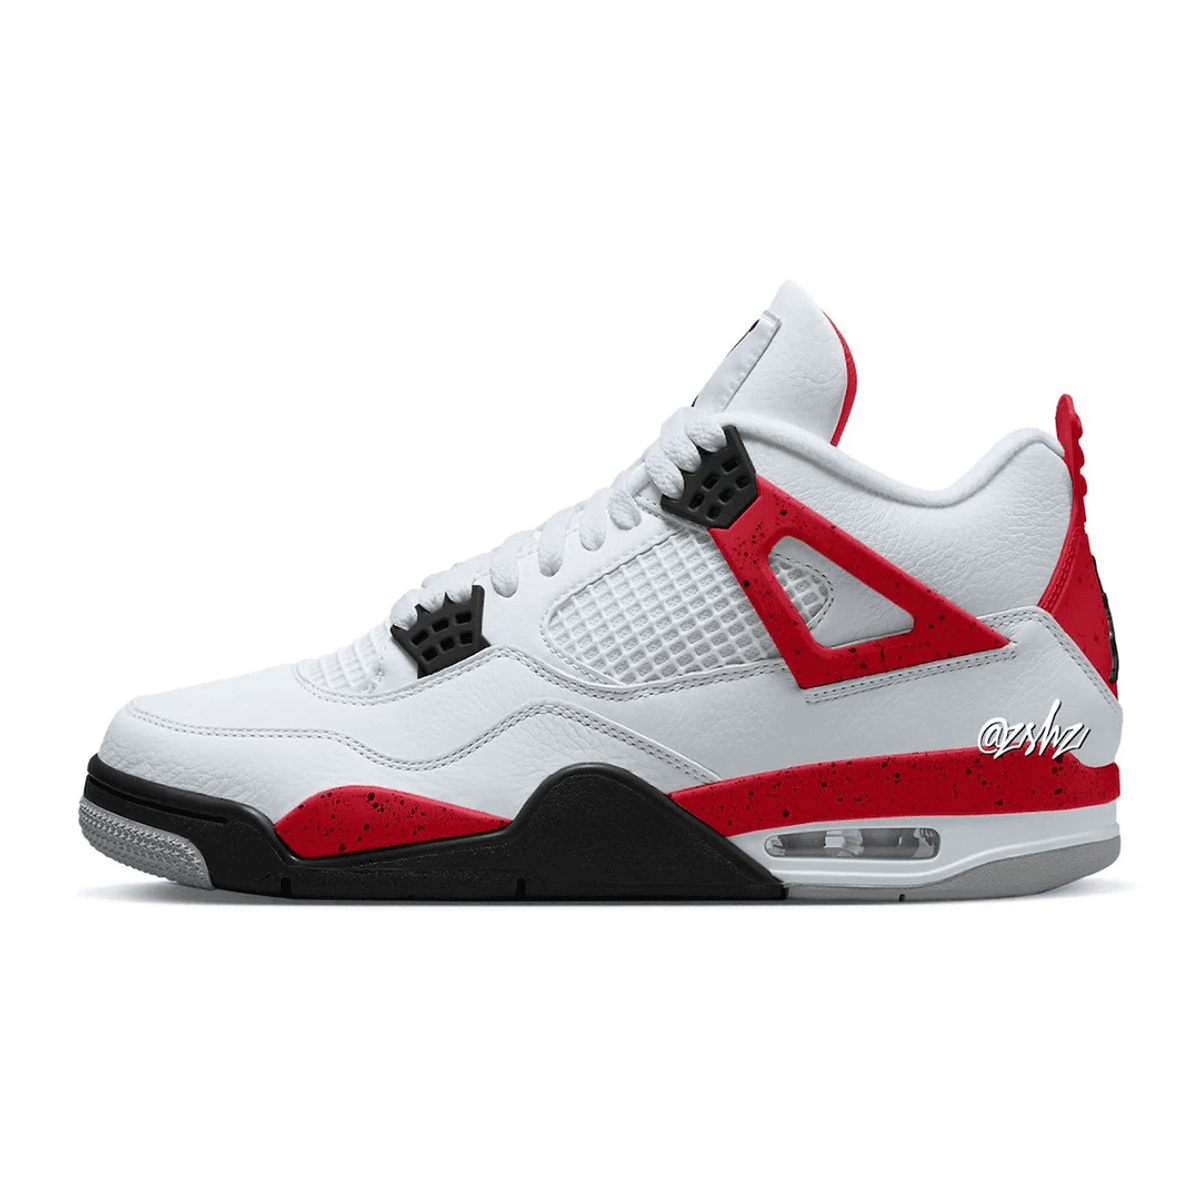 First Look At The New Air Jordan 4 Red Cement